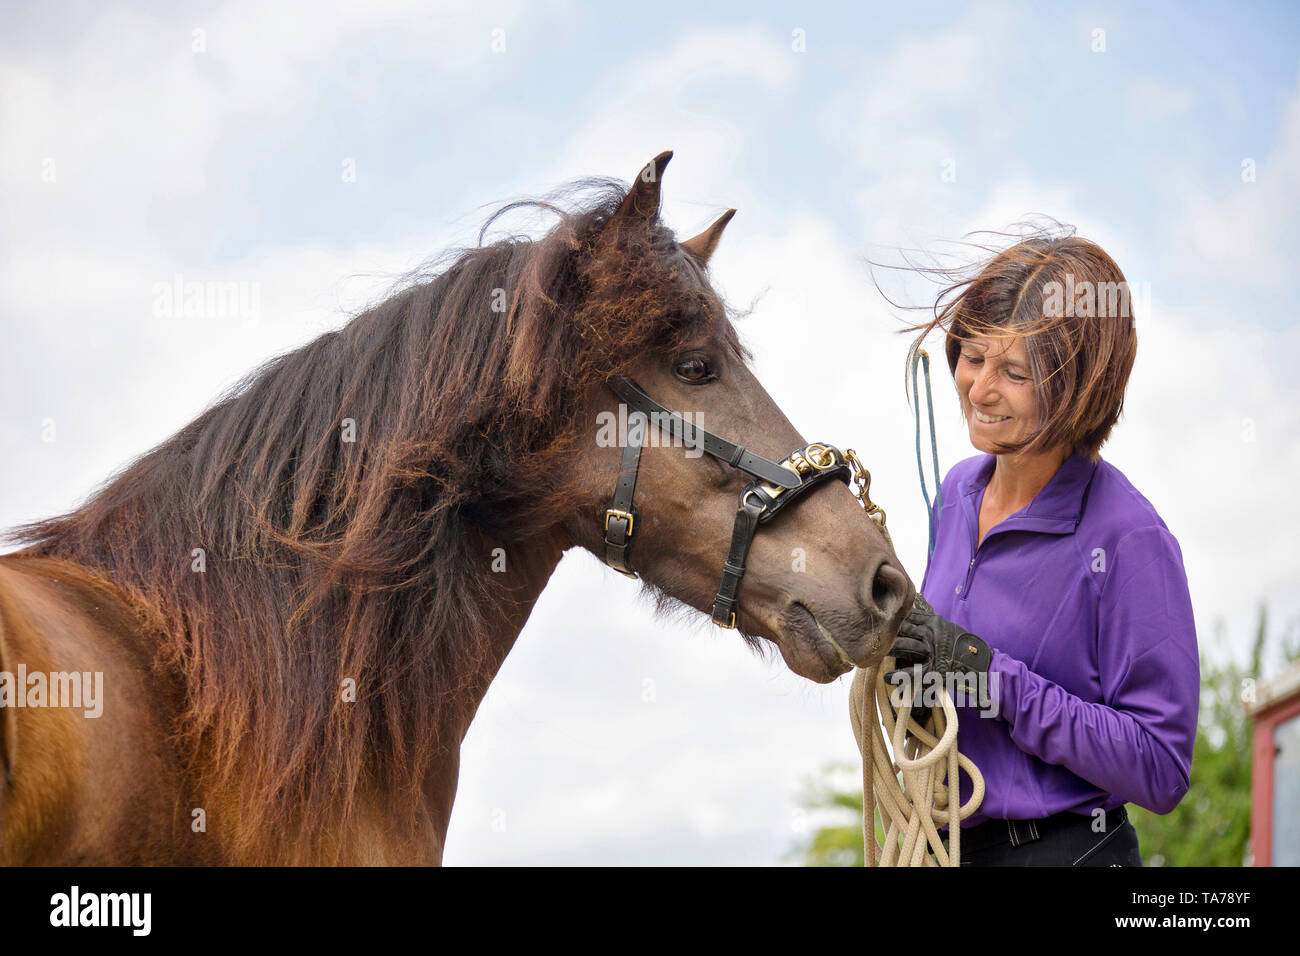 Icelandic Horse. Trainer patting a horse after lungeing. Austria Stock Photo